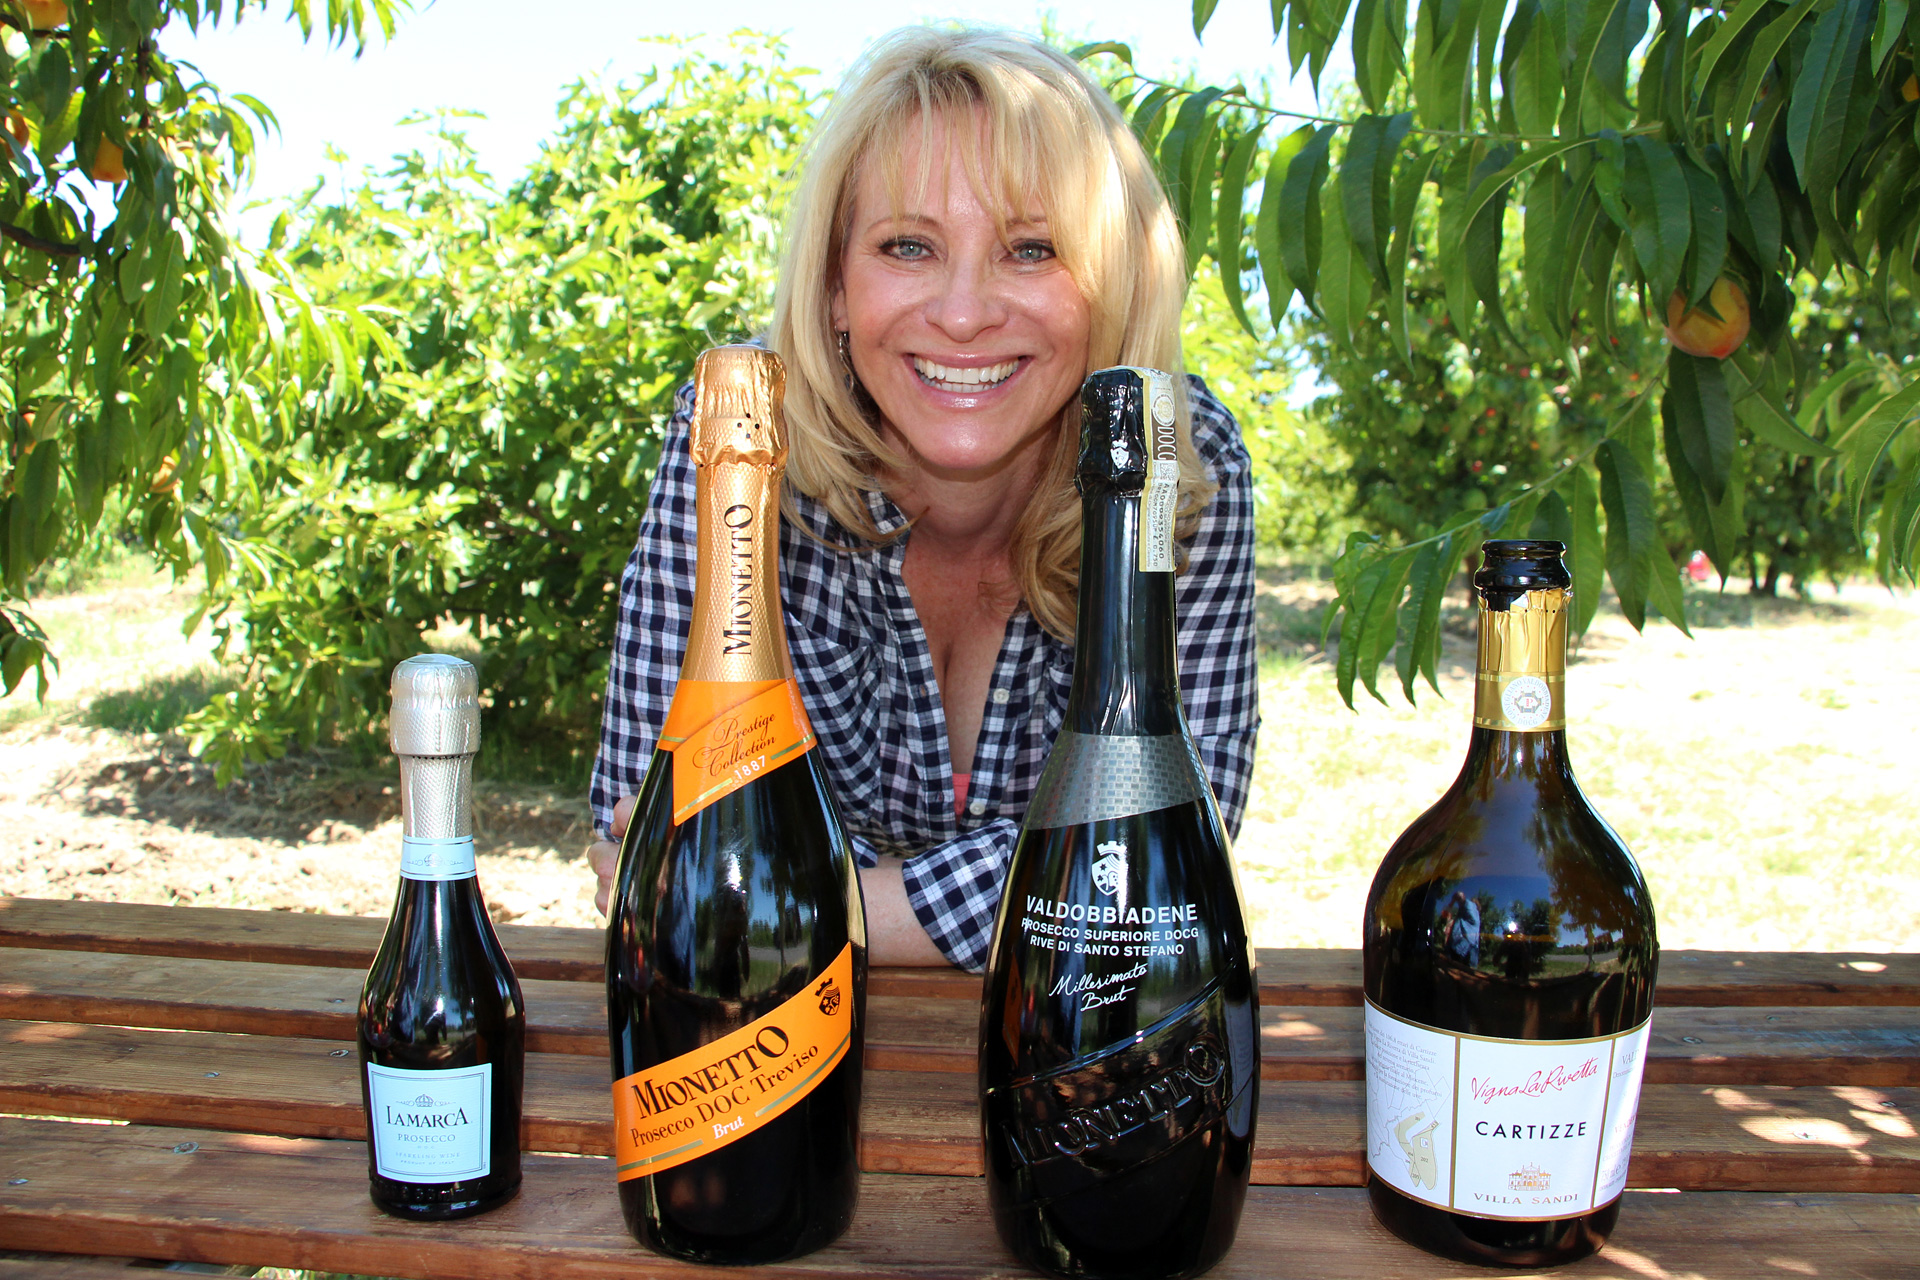 Leslie Sbrocco with Prosecco including DOC and DOCG designations.